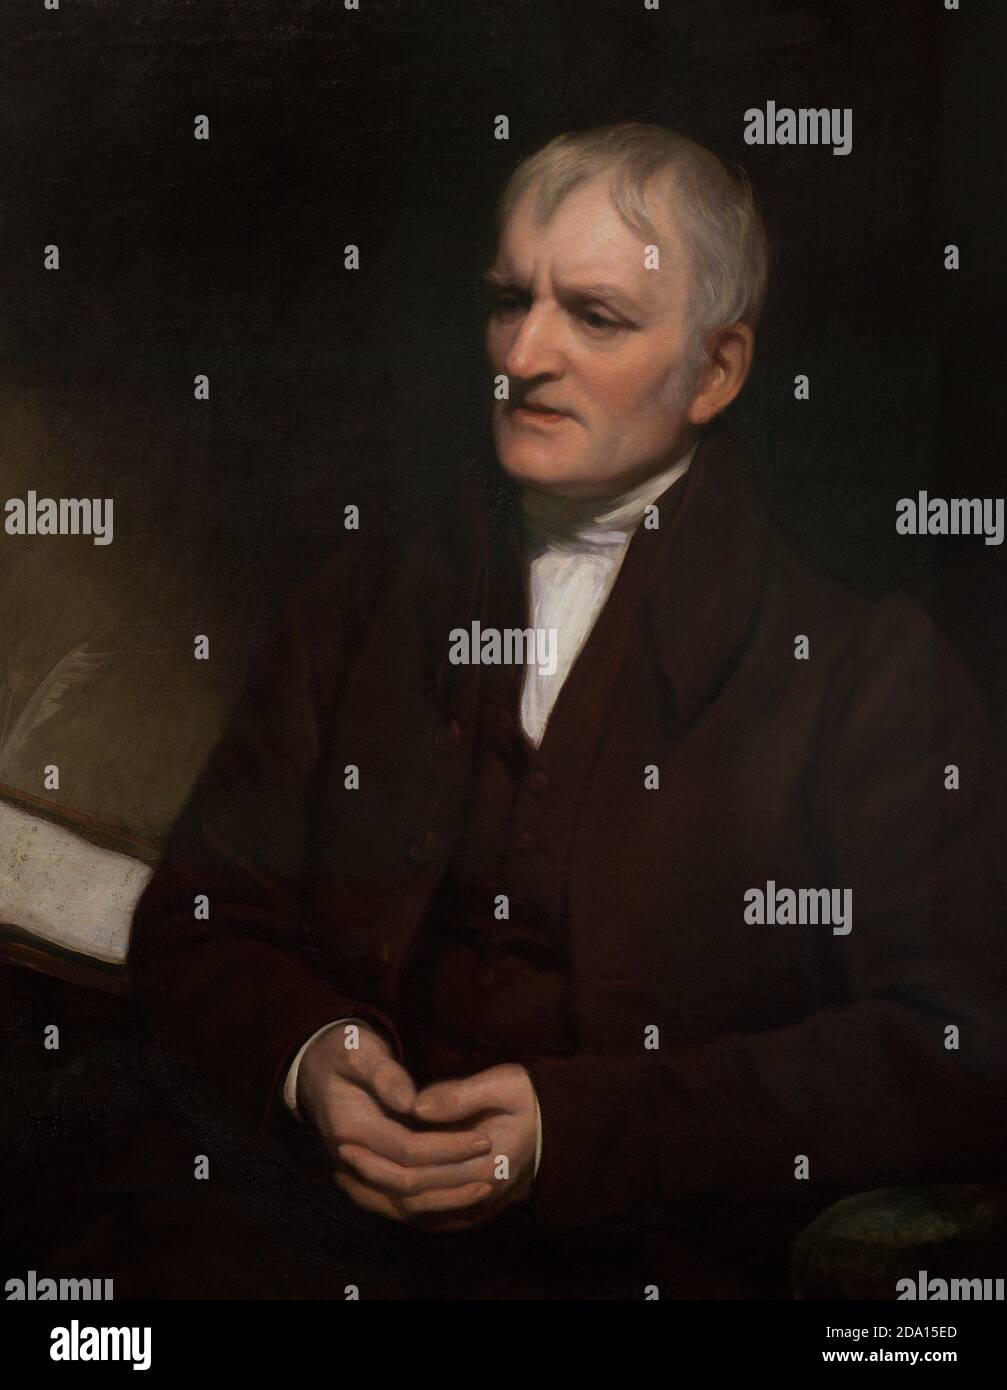 John Dalton (1766-1844). English chemist, physicist and meteorologist. Best known for introducing the modern atomic theory into chemistry. Portrait by Thomas Phillips (1770-1845). Oil on canvas (91,4 x 71,4 cm), signed and dated 1835. National Portrait Gallery. London, England, United Kingdom. Stock Photo